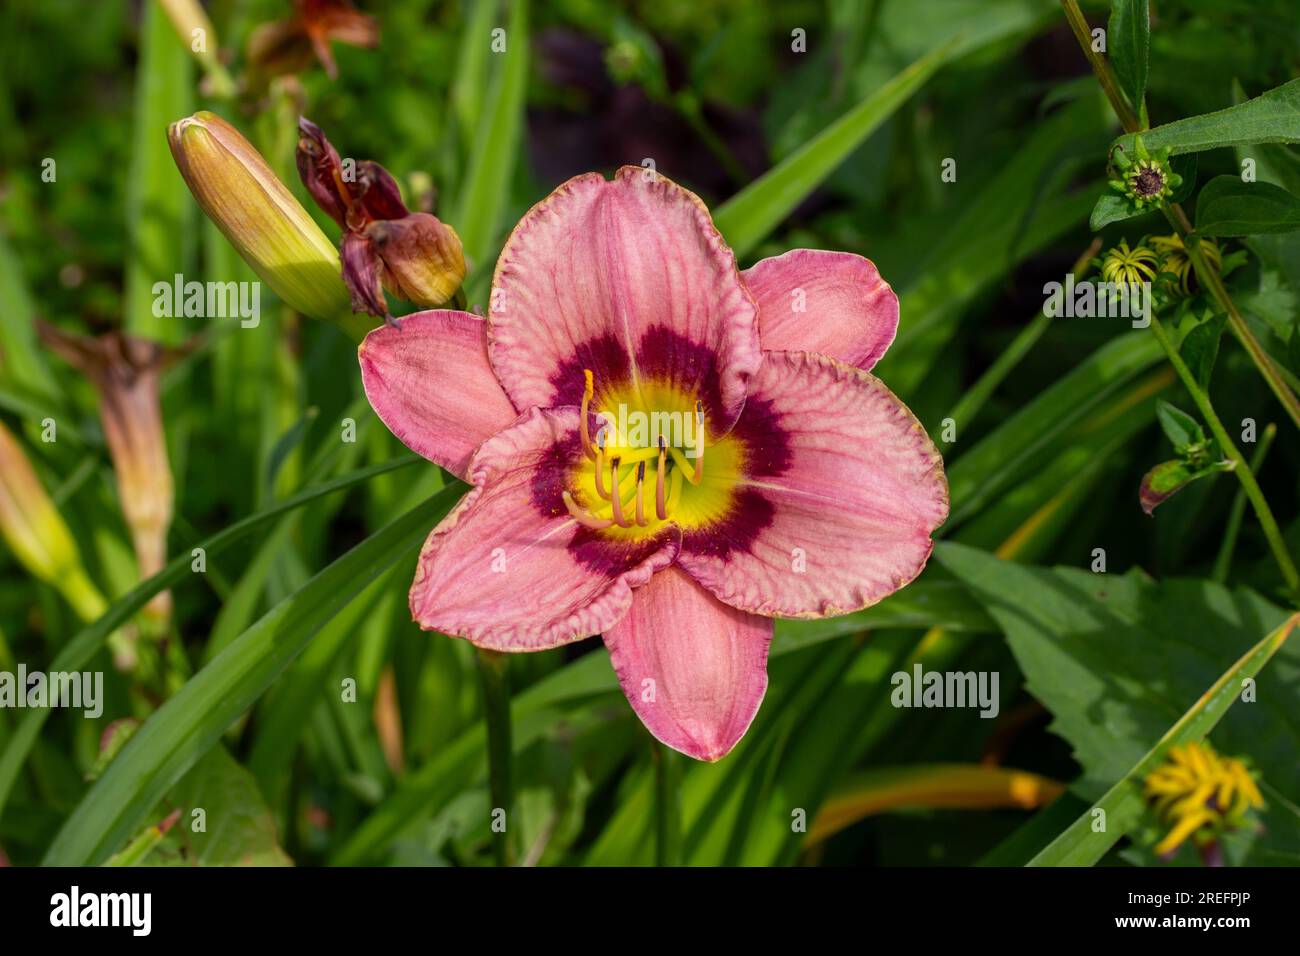 Close up view of beautiful pink and red color day lily flowers (hemerocallis) in a bright sunny garden Stock Photo